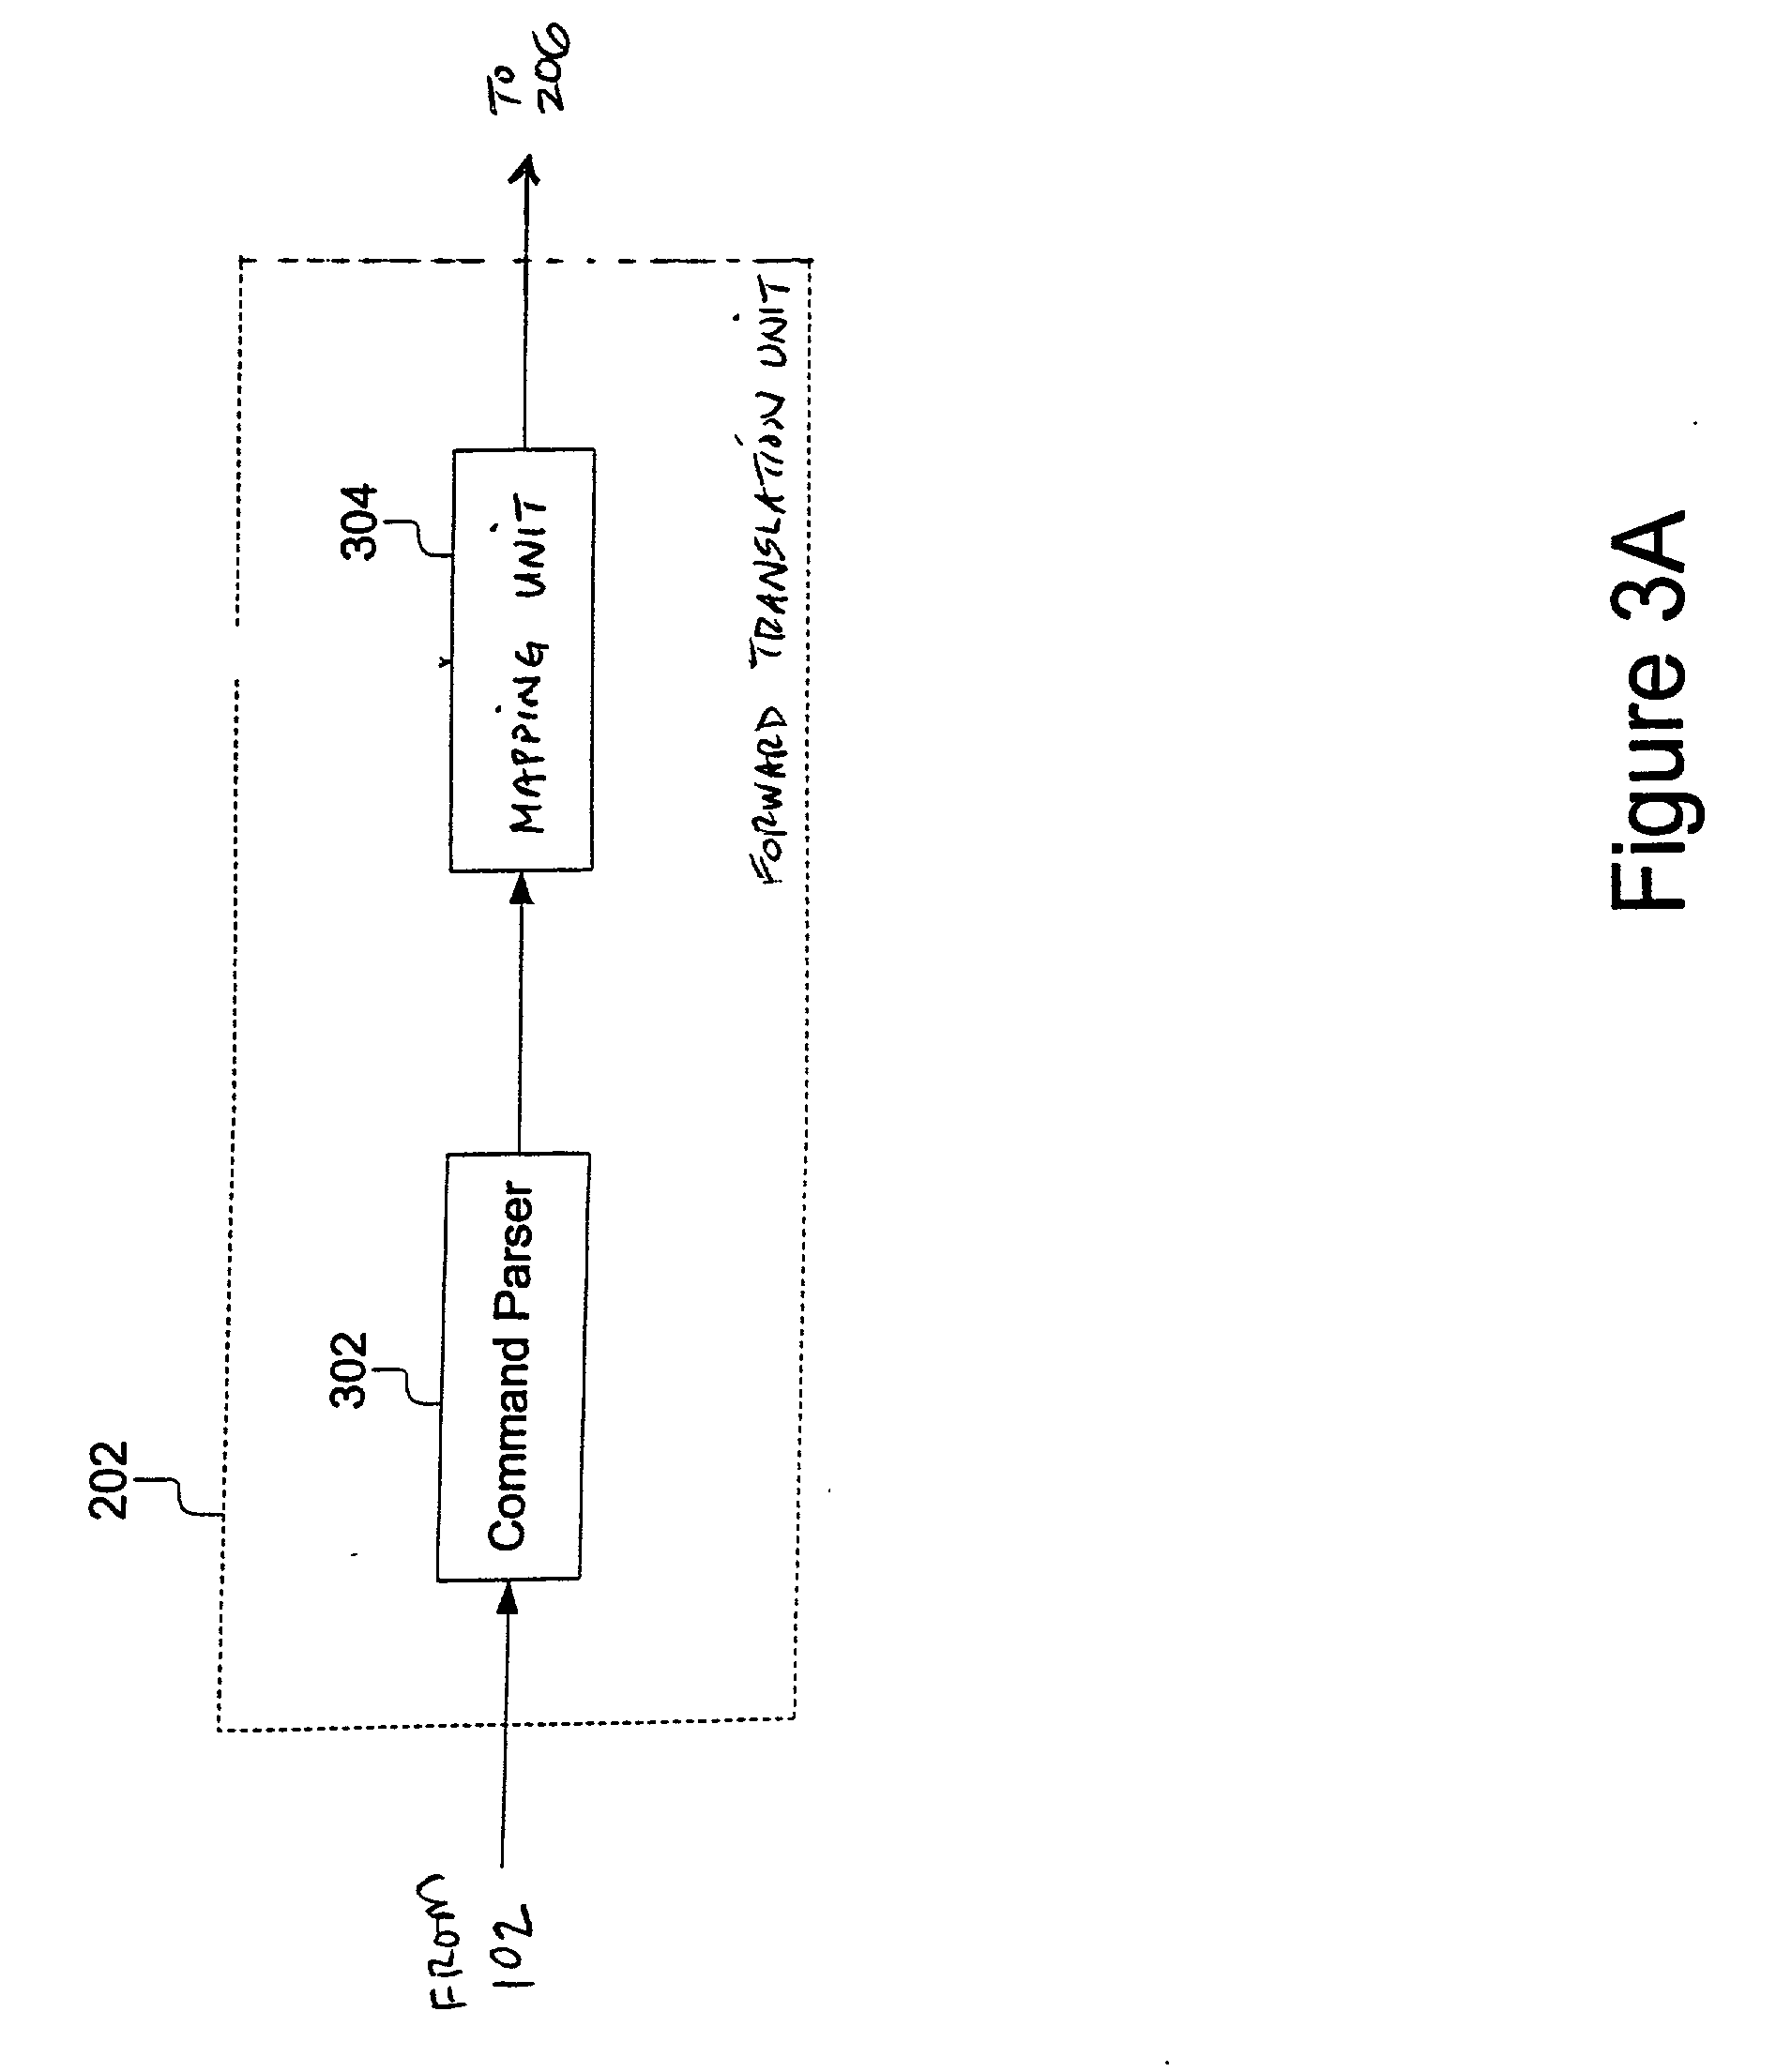 System and method for providing access to databases via directories and other hierarchical structures and interfaces